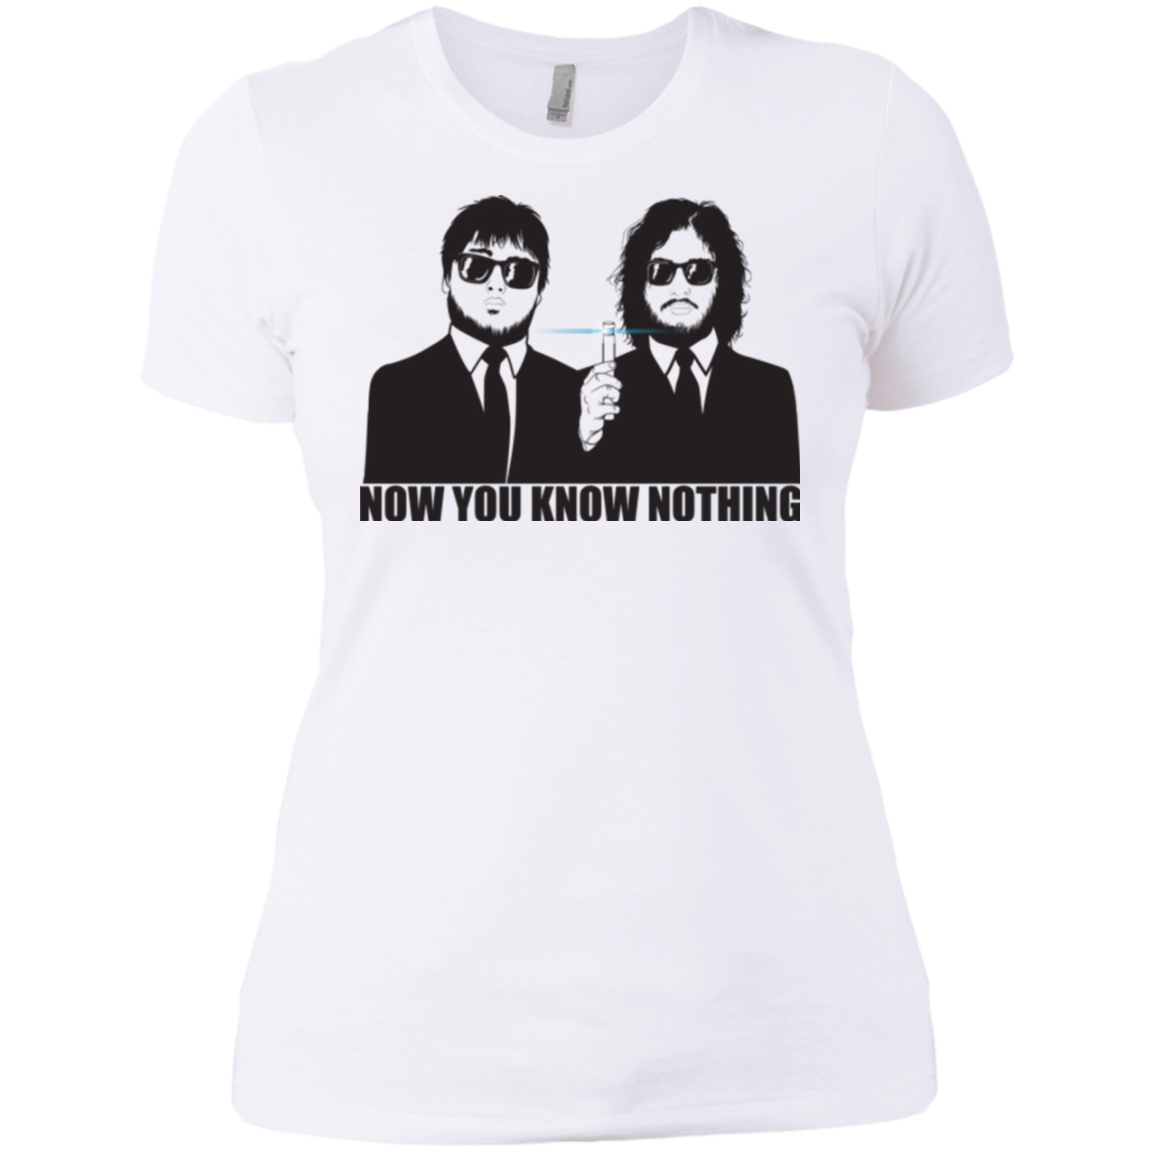 NOW YOU KNOW NOTHING Women's Premium T-Shirt